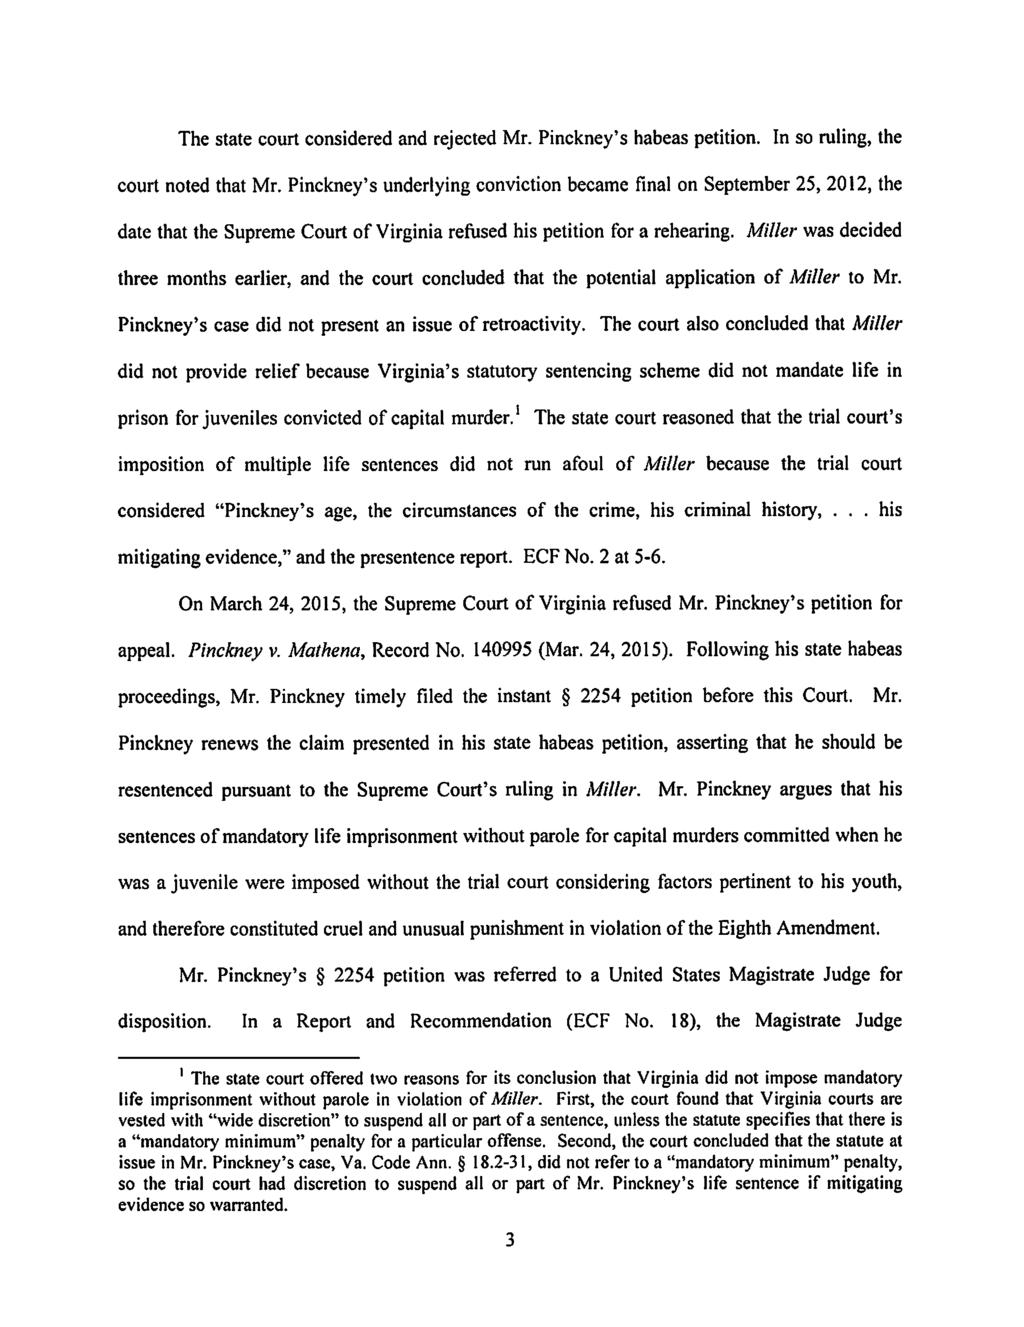 The state court considered and rejected Mr. Pinckney's habeas petition. In so ruling, the court noted that Mr.